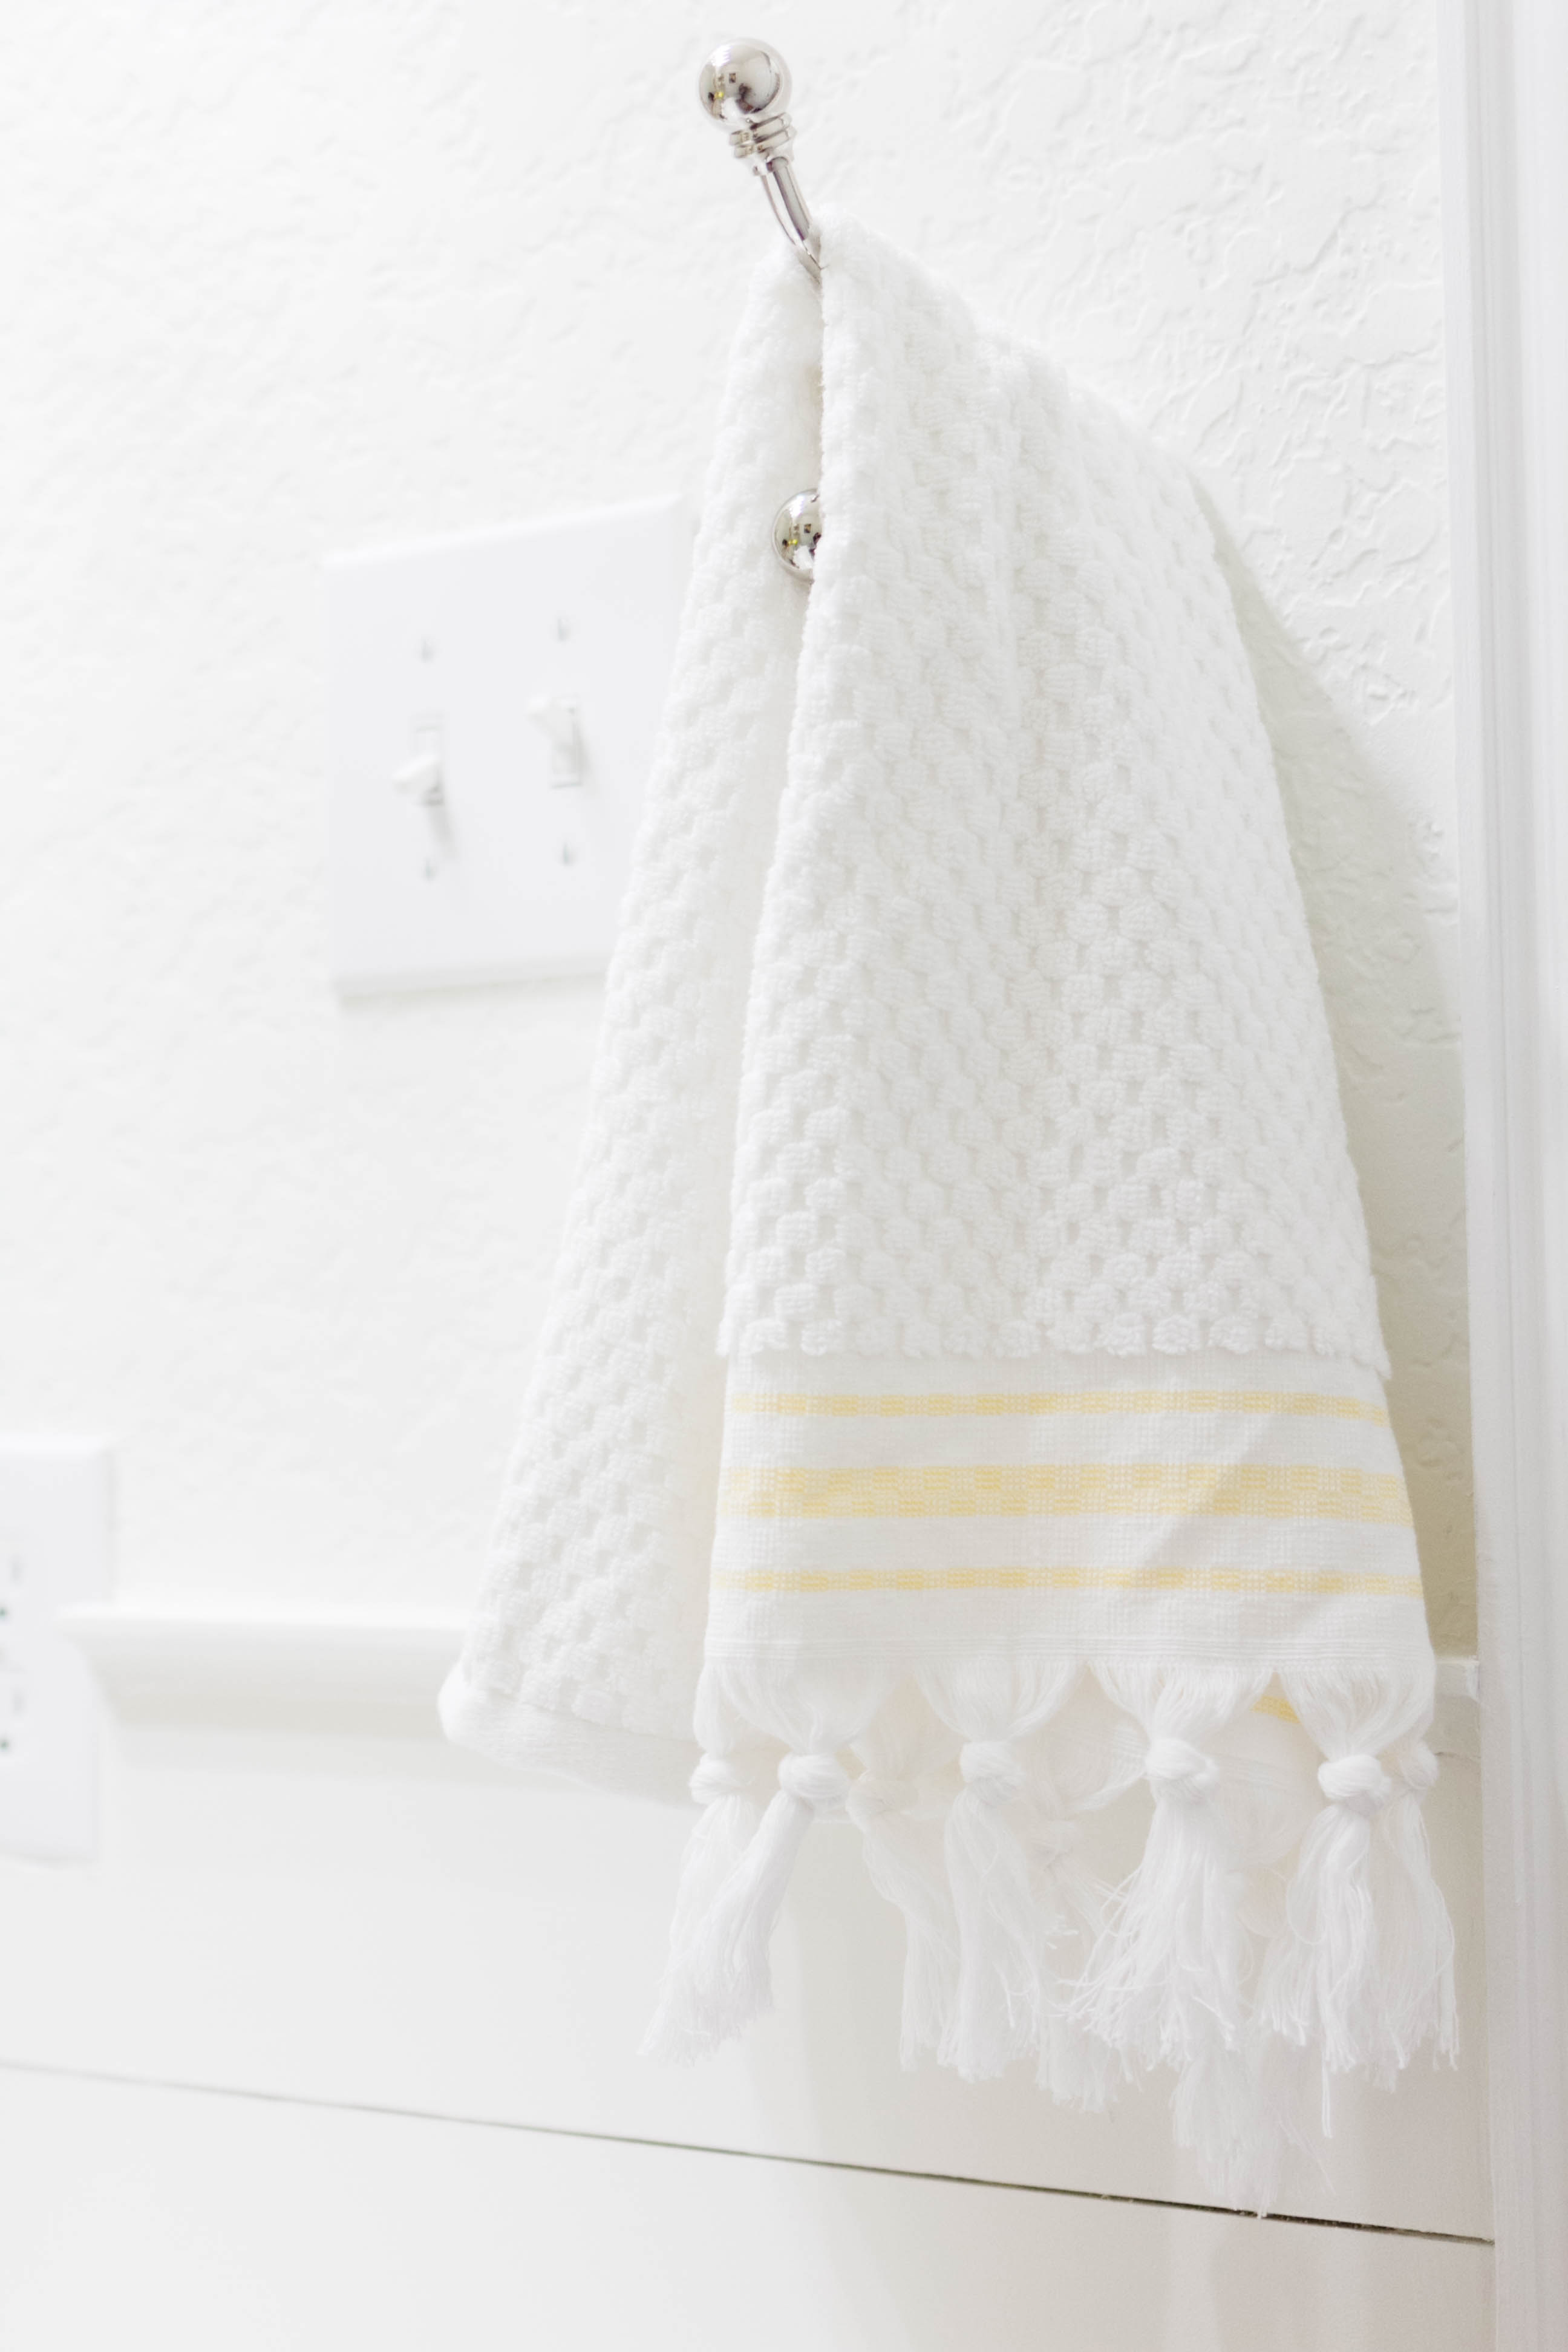 Hand Towel in a bright and welcoming mudroom/powder room combo with a modern-casual-beach feel. Designed by: IrisNacole.com